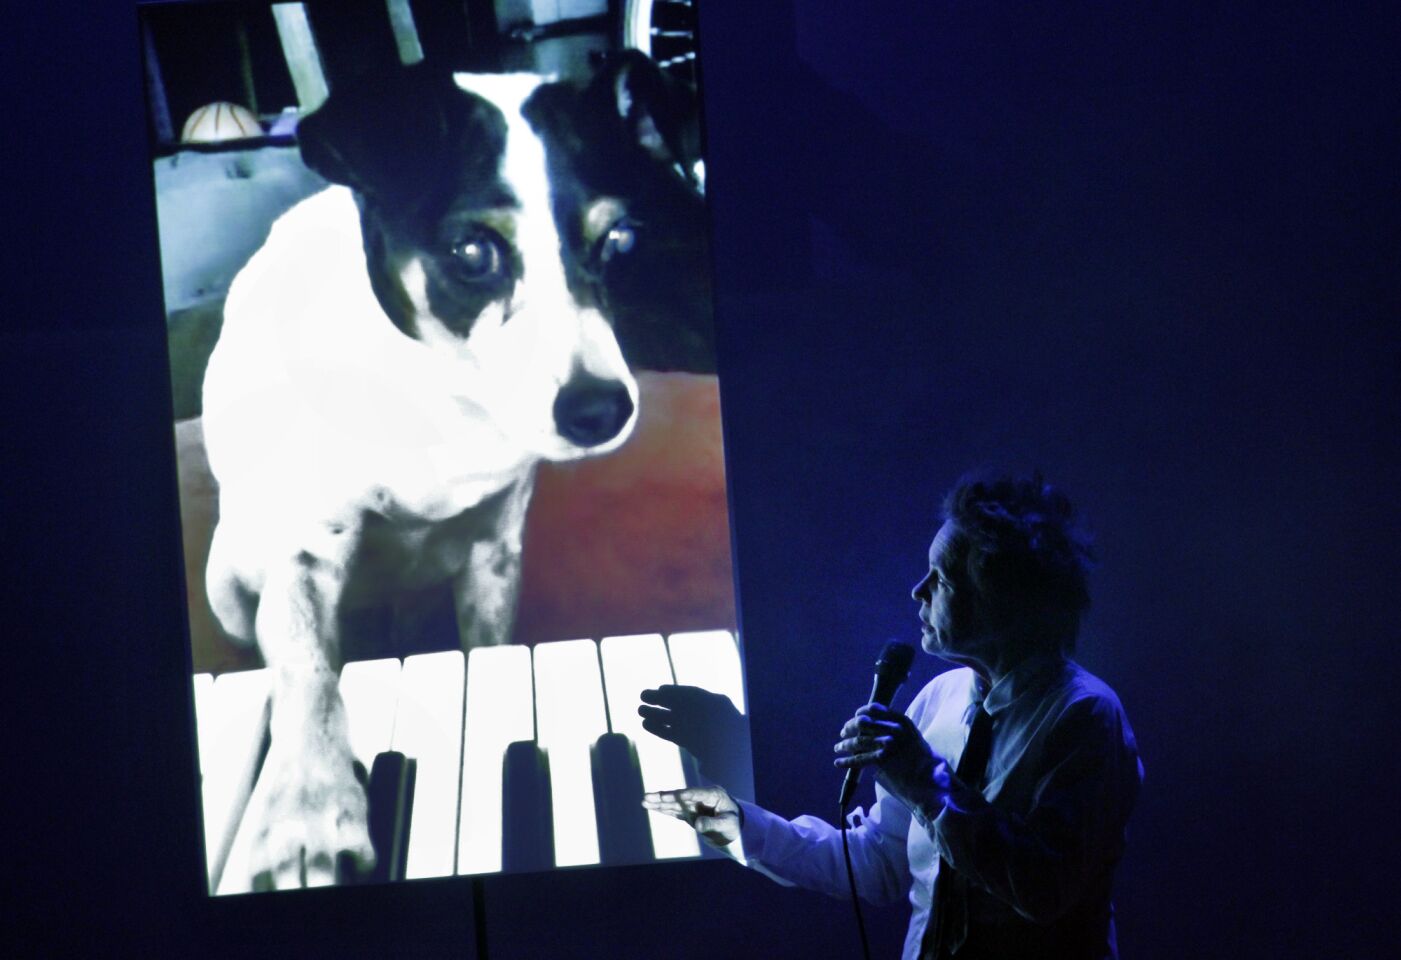 Arts and culture in pictures by The Times | Laurie Anderson in 'Dirtday!'